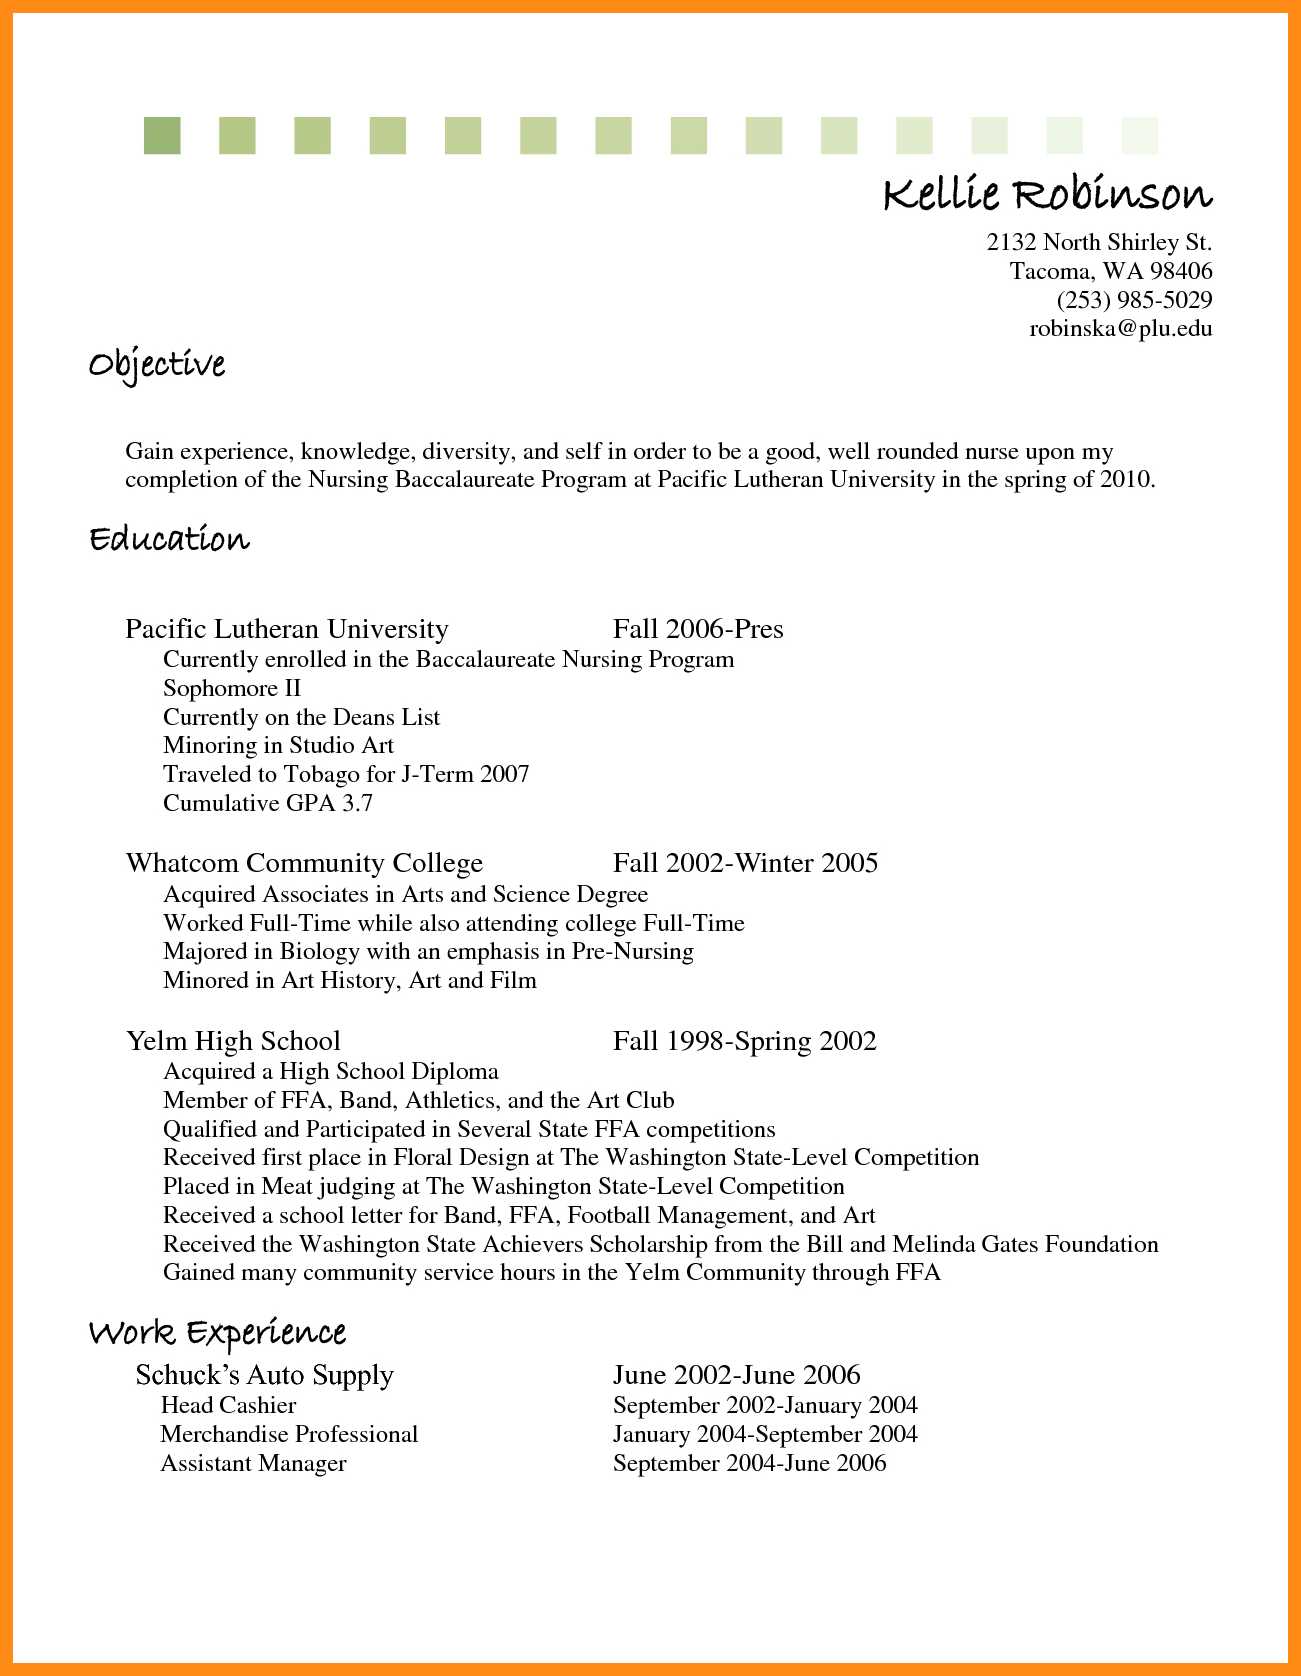 Examples Of Objectives For Resumes Biology Resume Objective Examples Retail Resume Template Image Job Objectives New Sales Associate examples of objectives for resumes|wikiresume.com